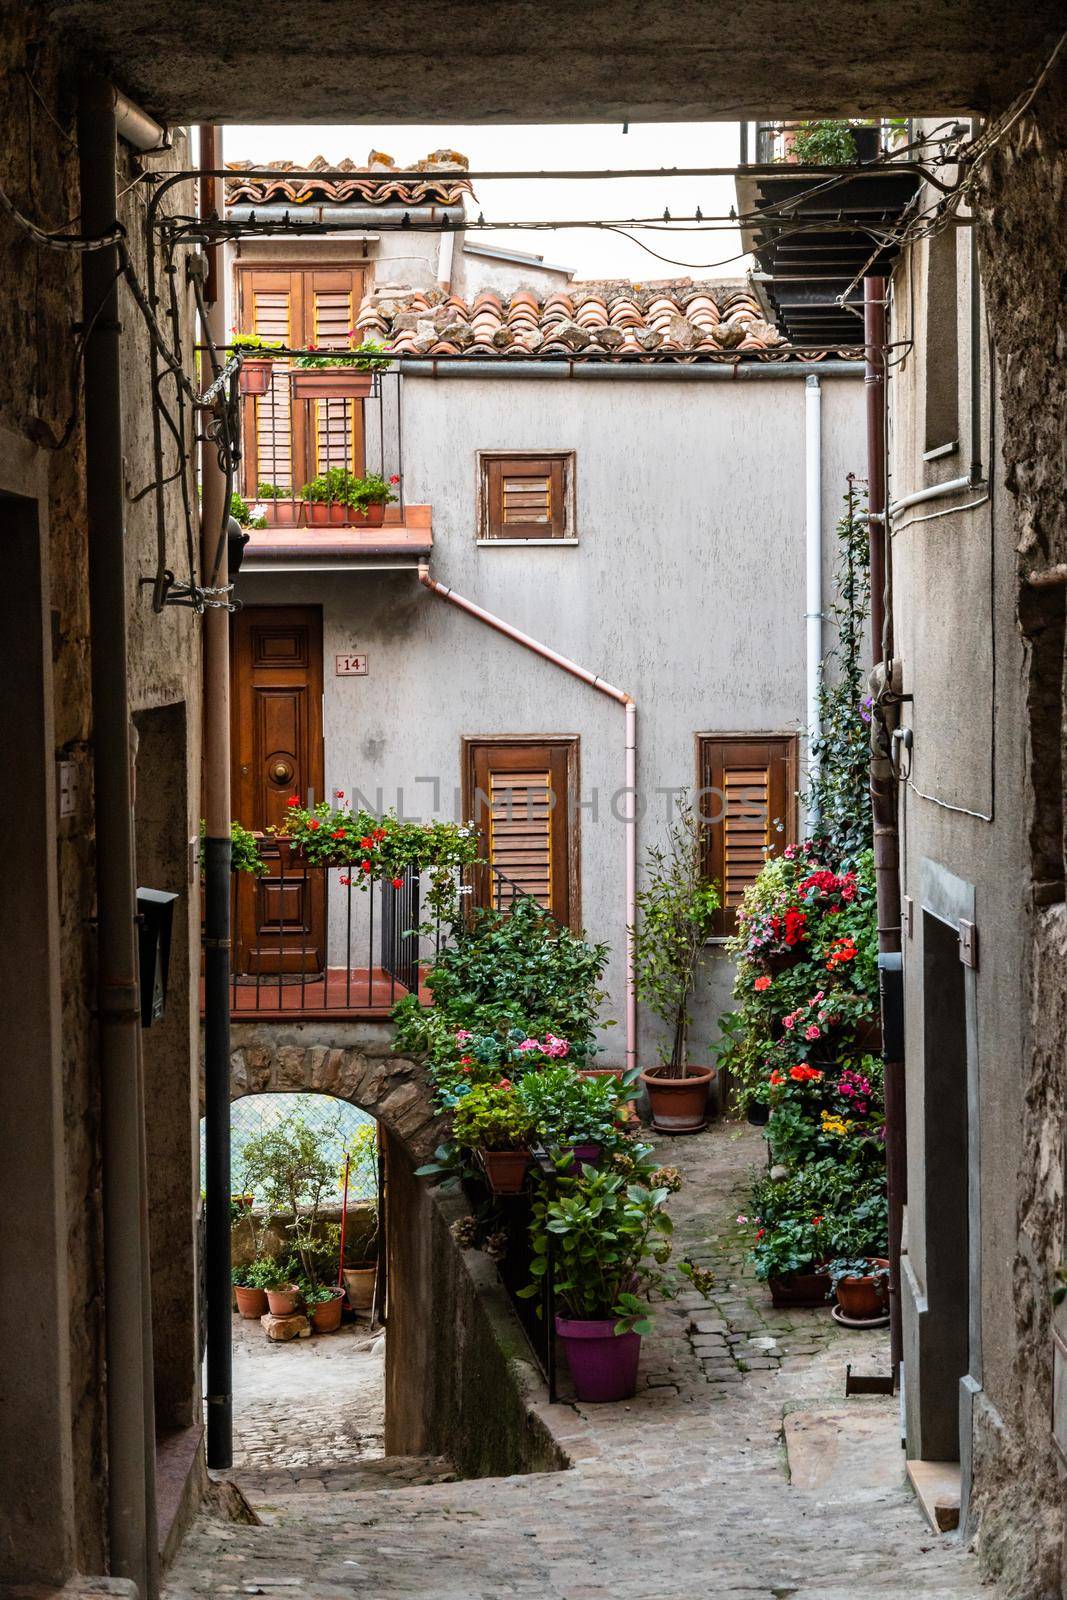 Rural houses and narrow streets in the medieval village Geraci Siculo, Italy by mauricallari